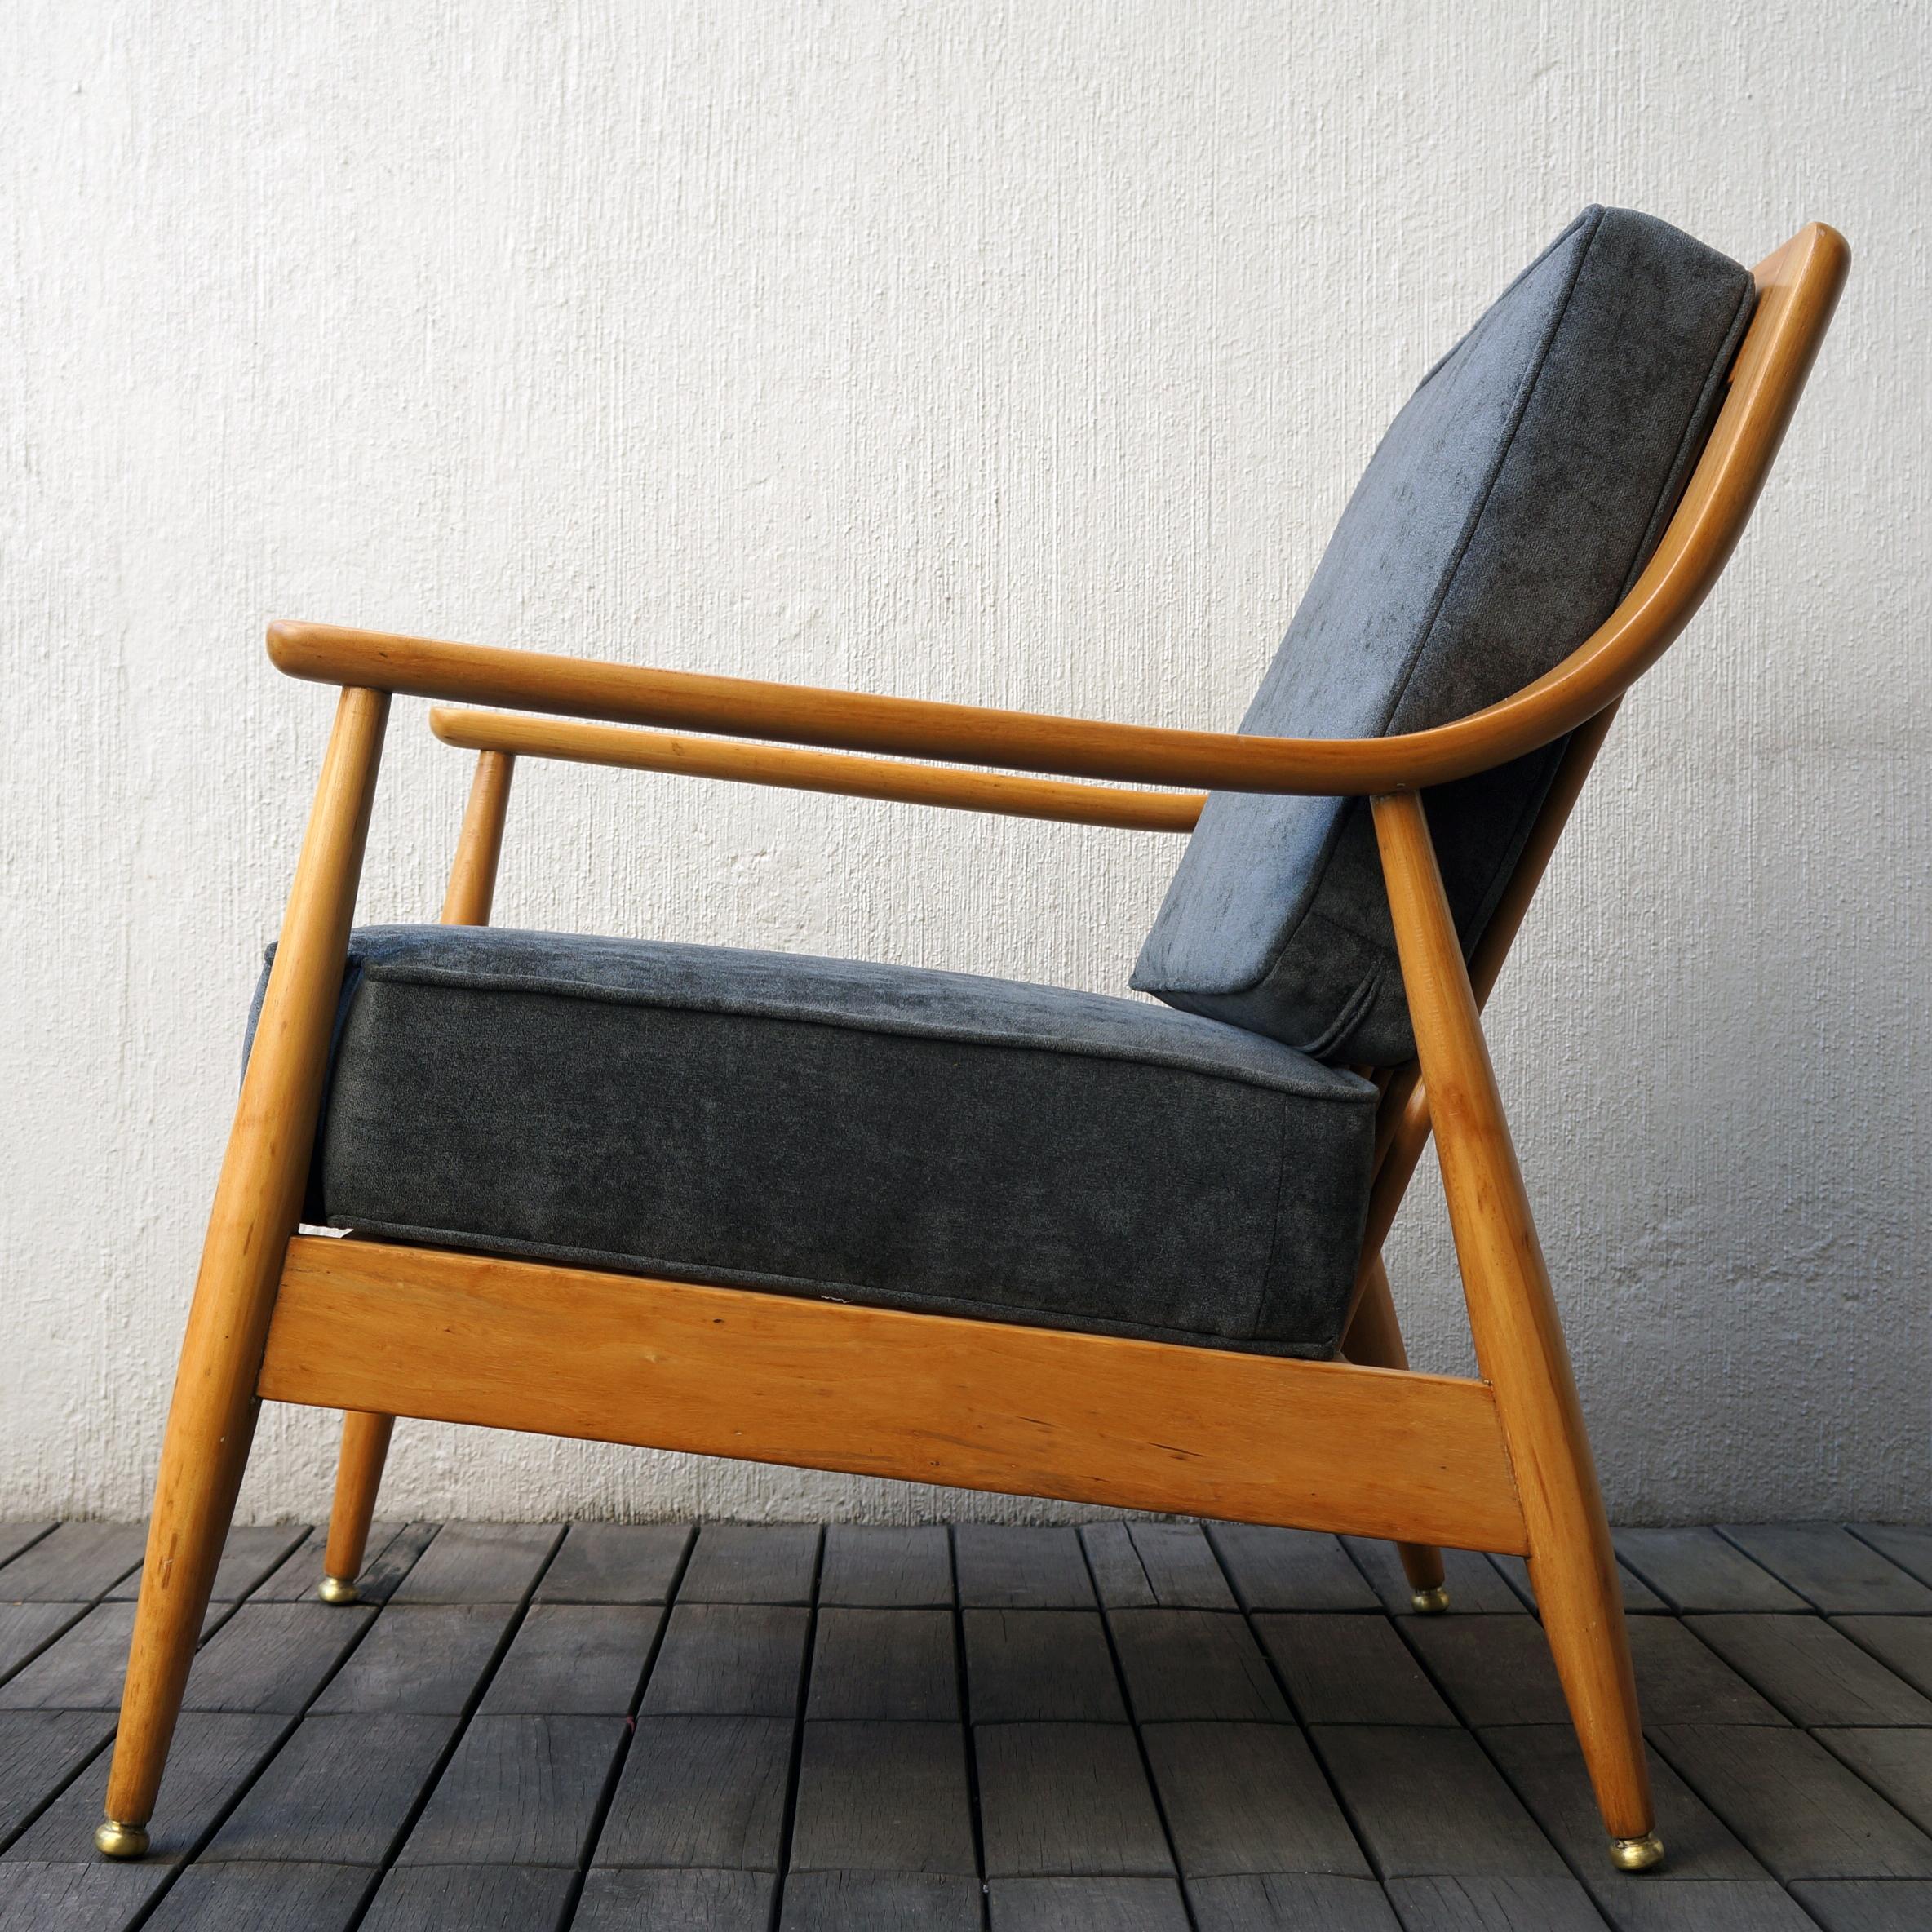 Mexican Midcentury Lounge Chair, “Malinche“, 1950s In Excellent Condition In Mérida, Yucatan